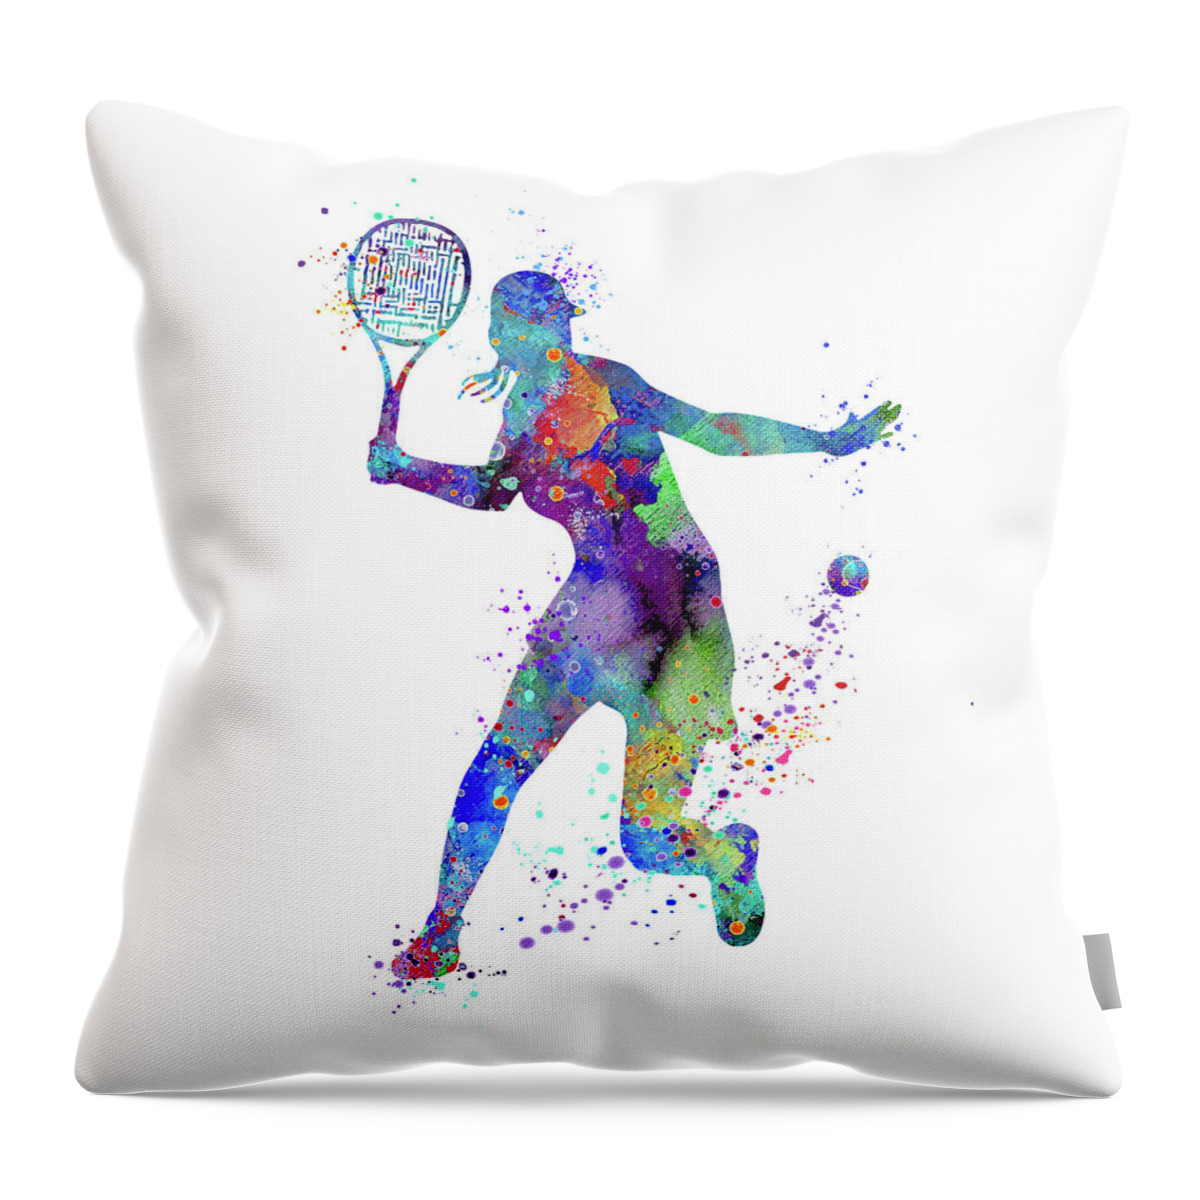 Tennis Throw Pillow featuring the digital art Girl Tennis Forehand Watercolor Sport Silhouette by White Lotus